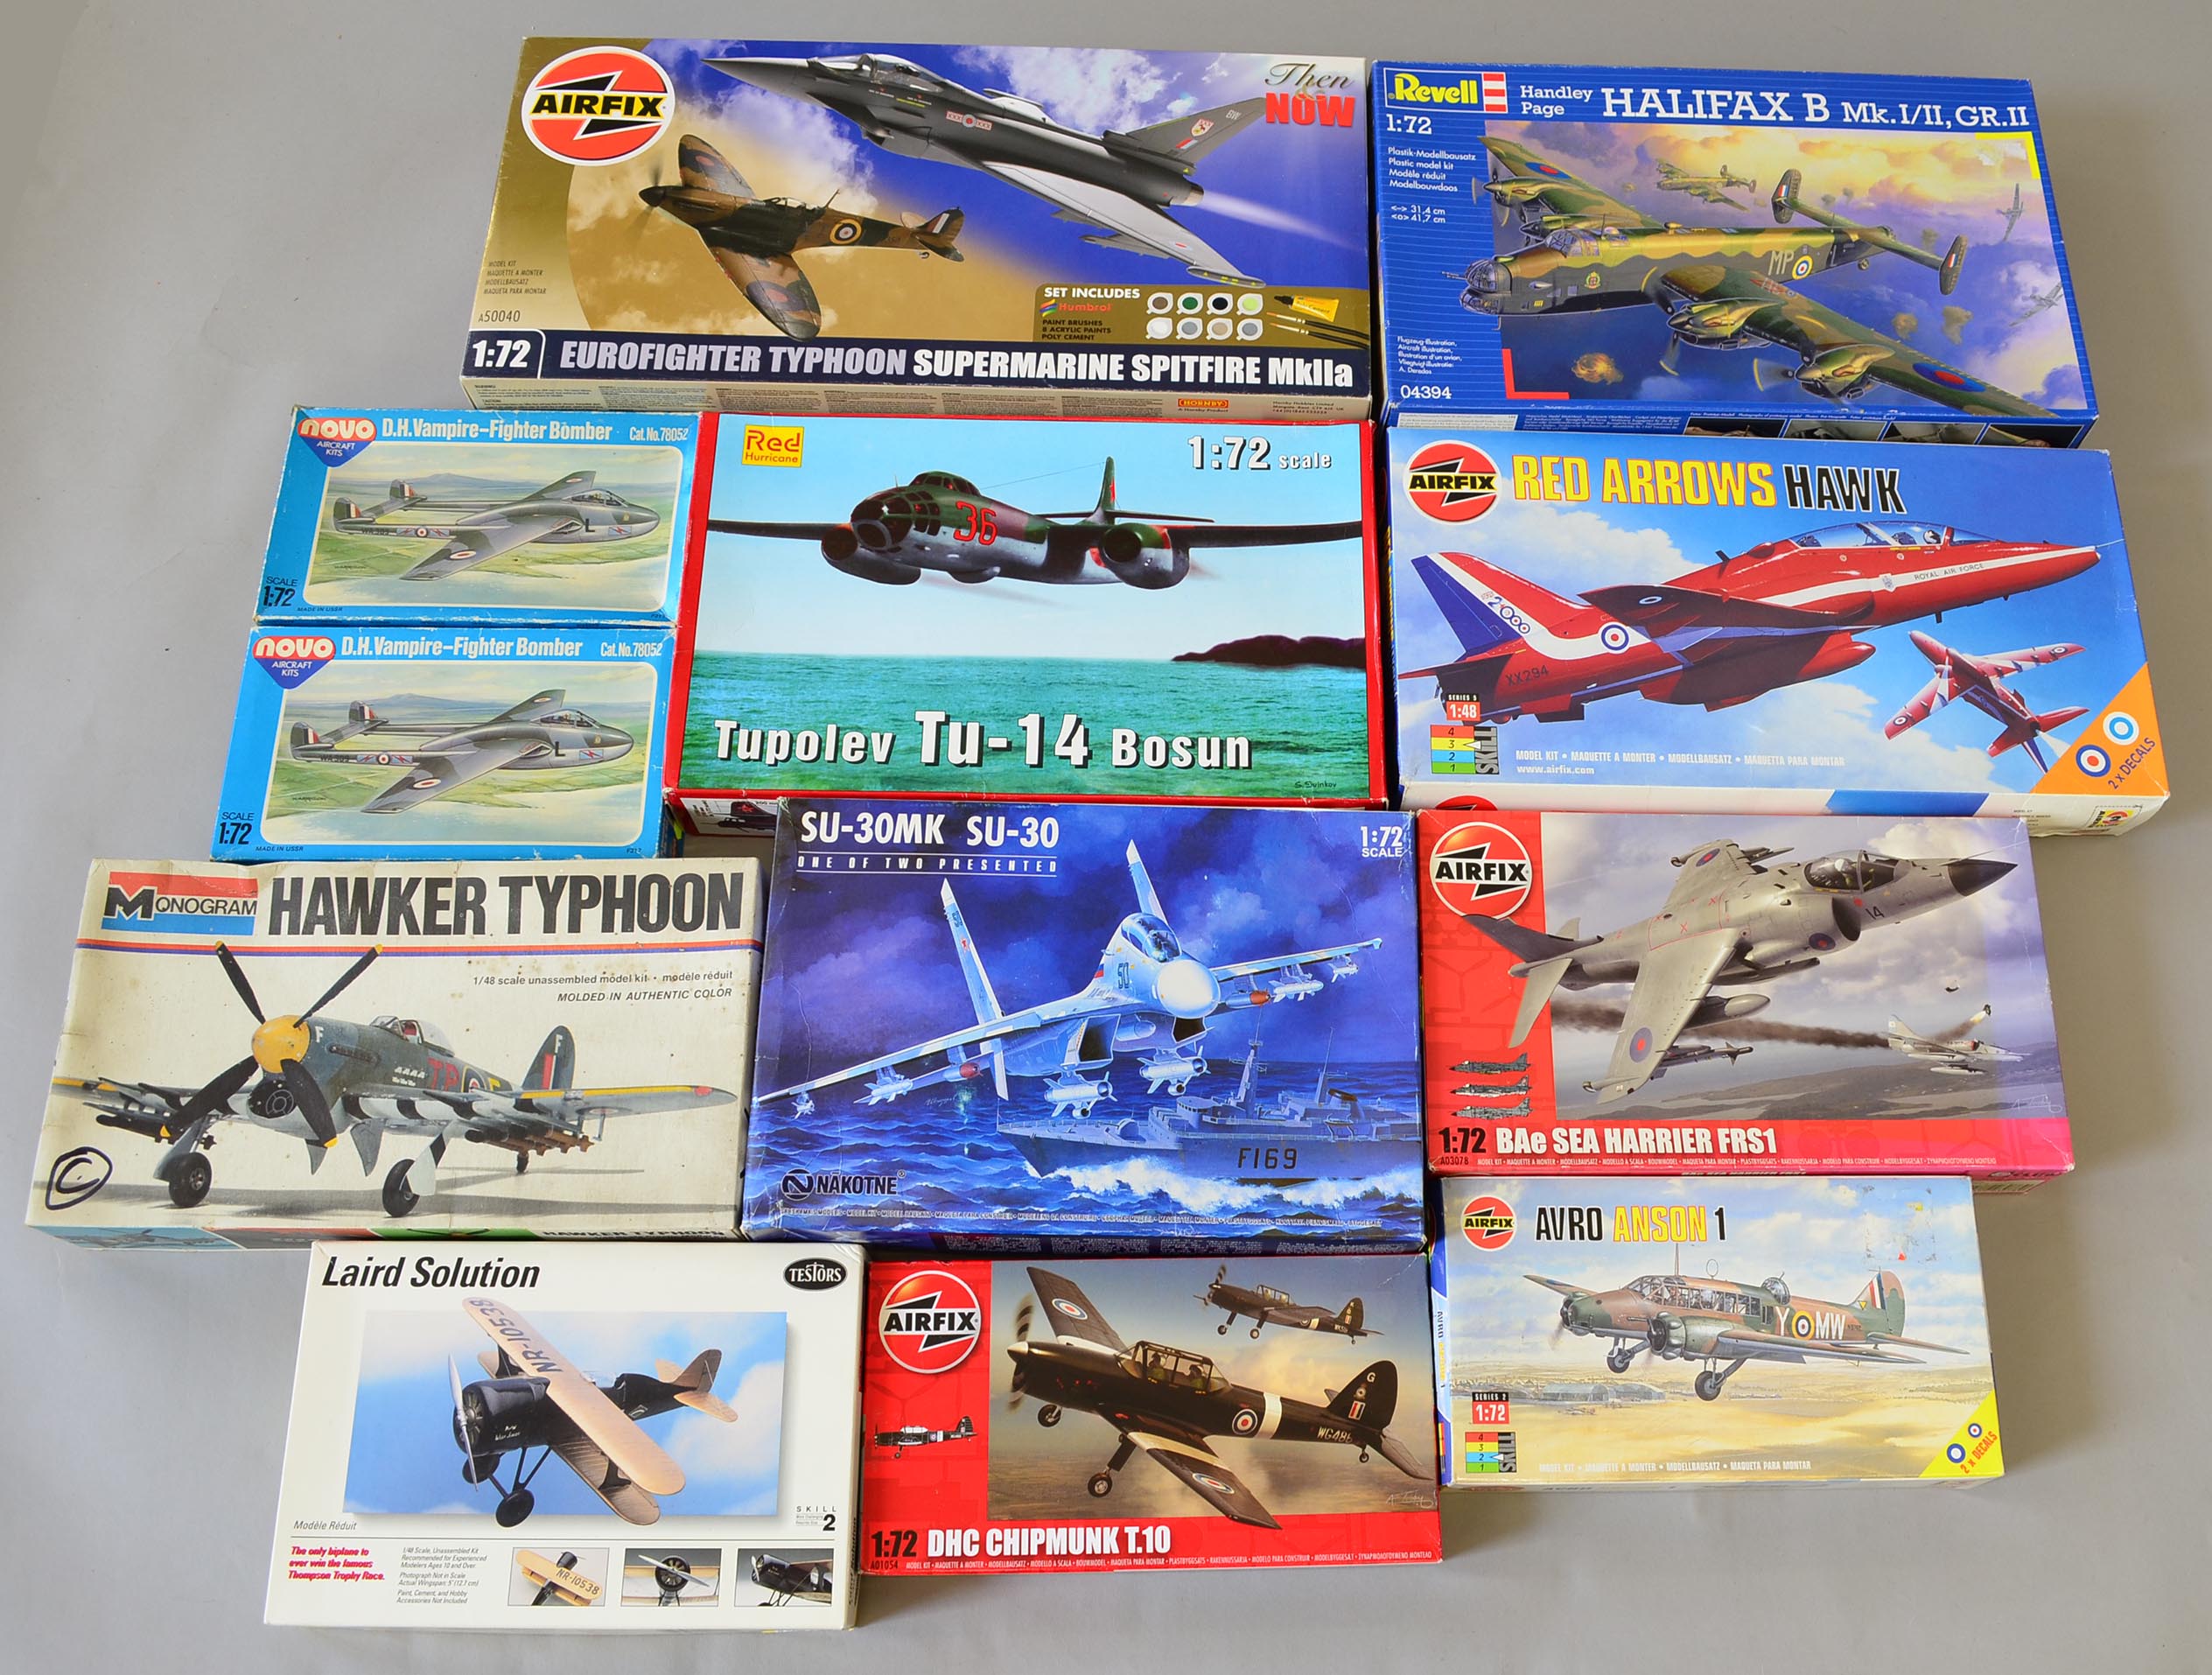 12 x plastic model kits, all aircraft, by Airfix, Novo and similar. All boxed, unstarted and appear